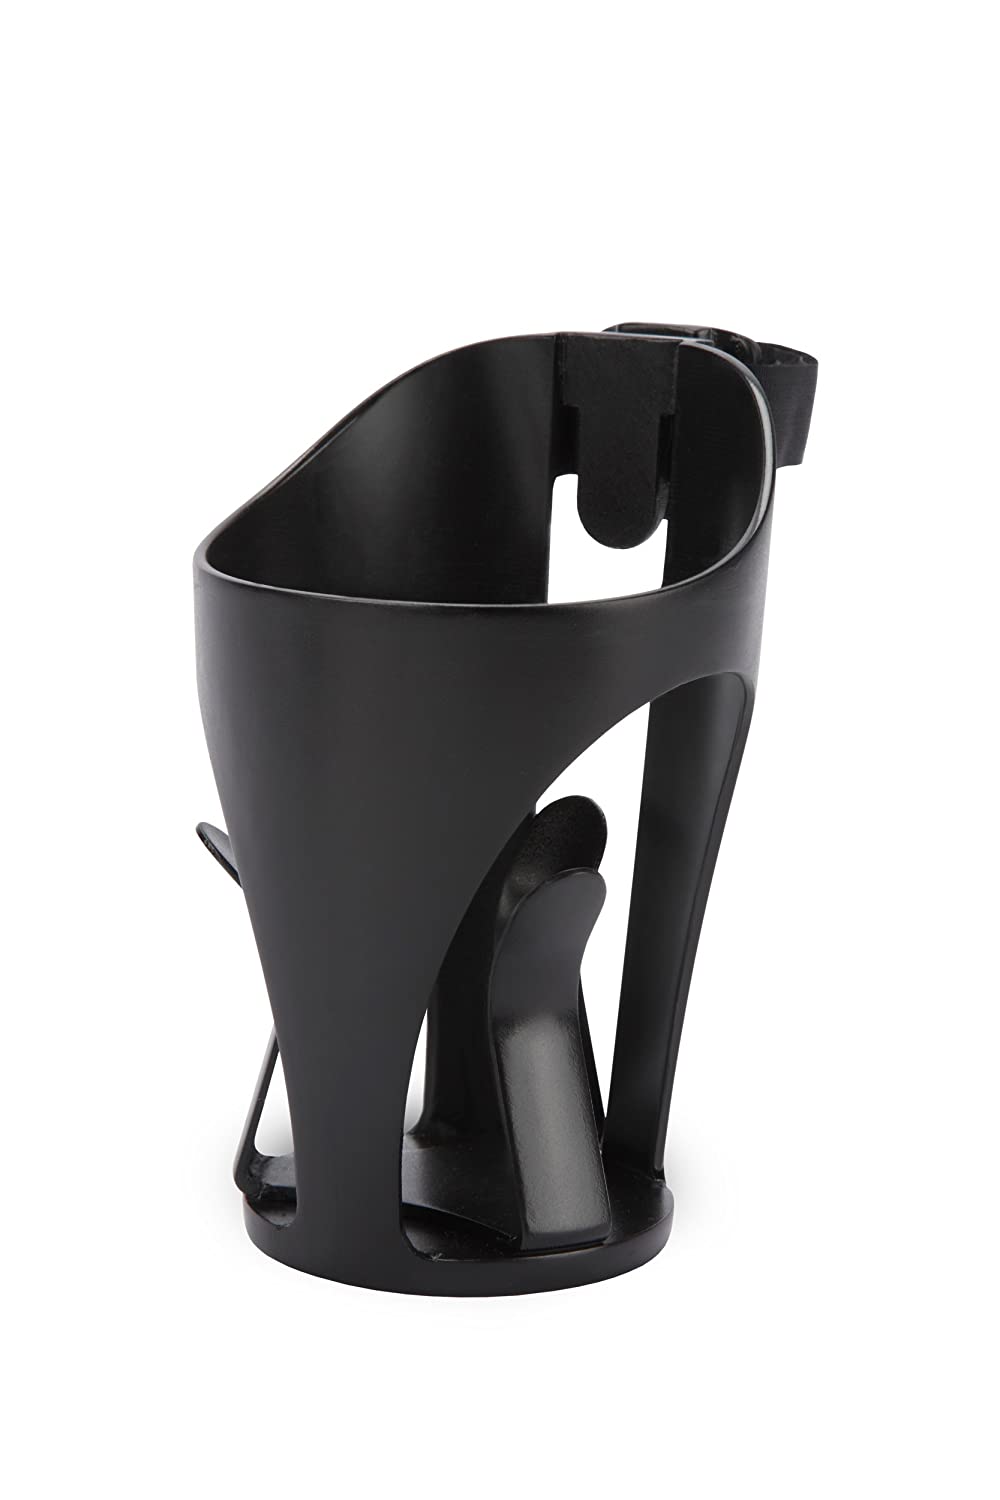 Diono Stroller Cup Holder, Black - ANB Baby -$20 - $50